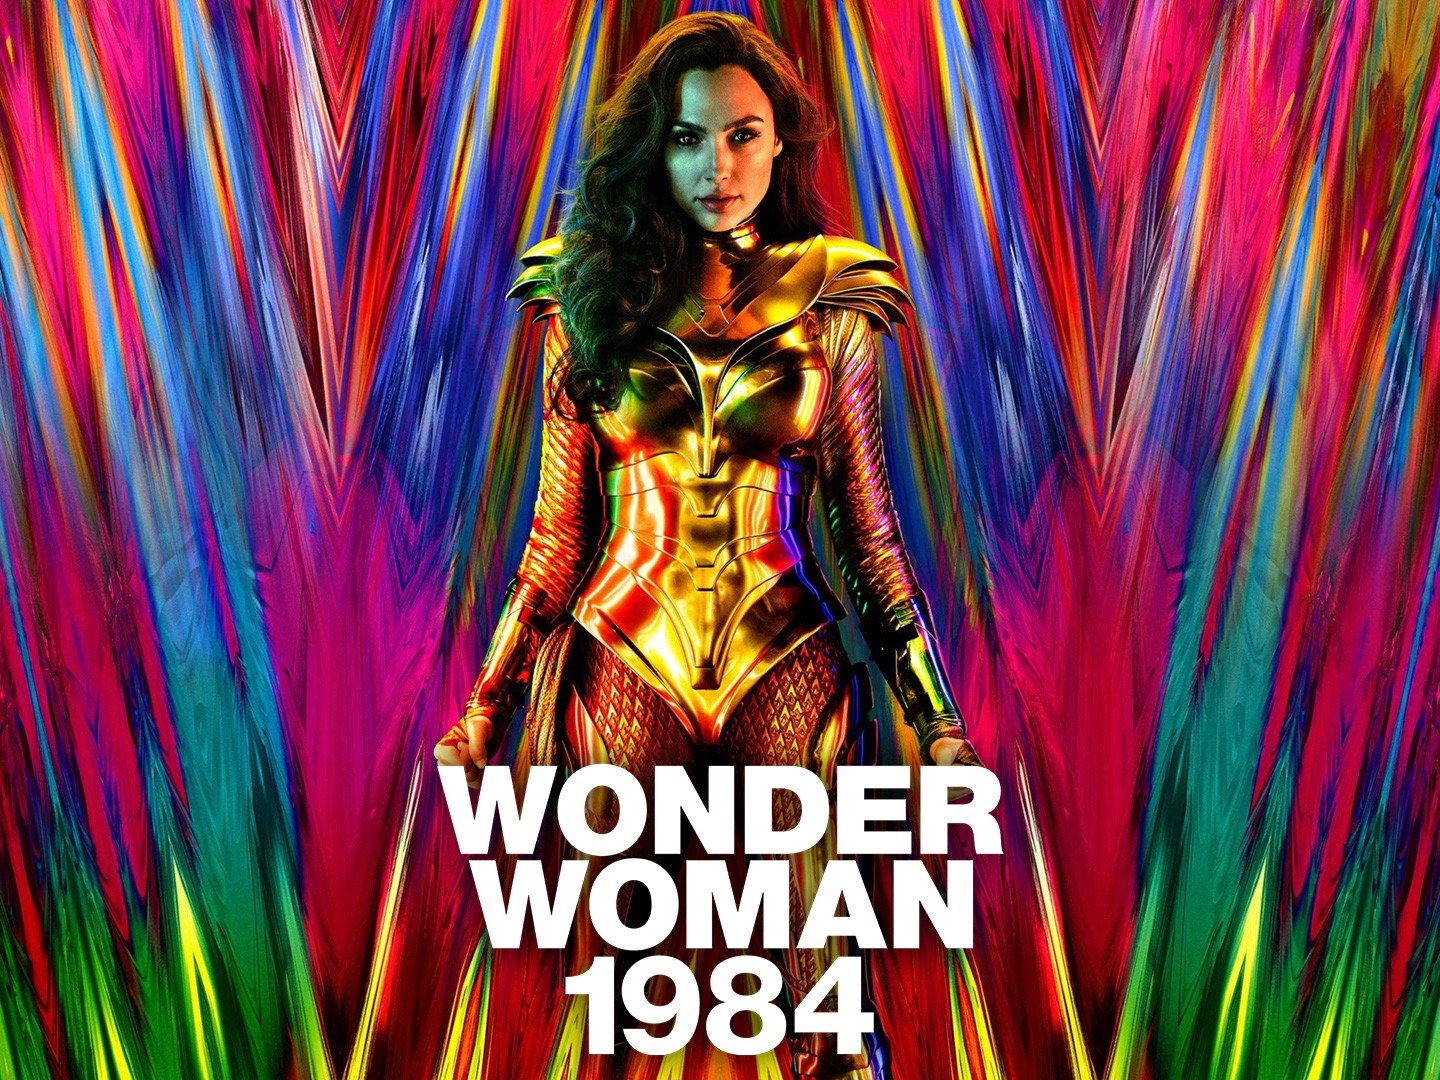 Wonder Woman 1984 Comic Con Experience Trailer Trailers And Videos Rotten Tomatoes 1536